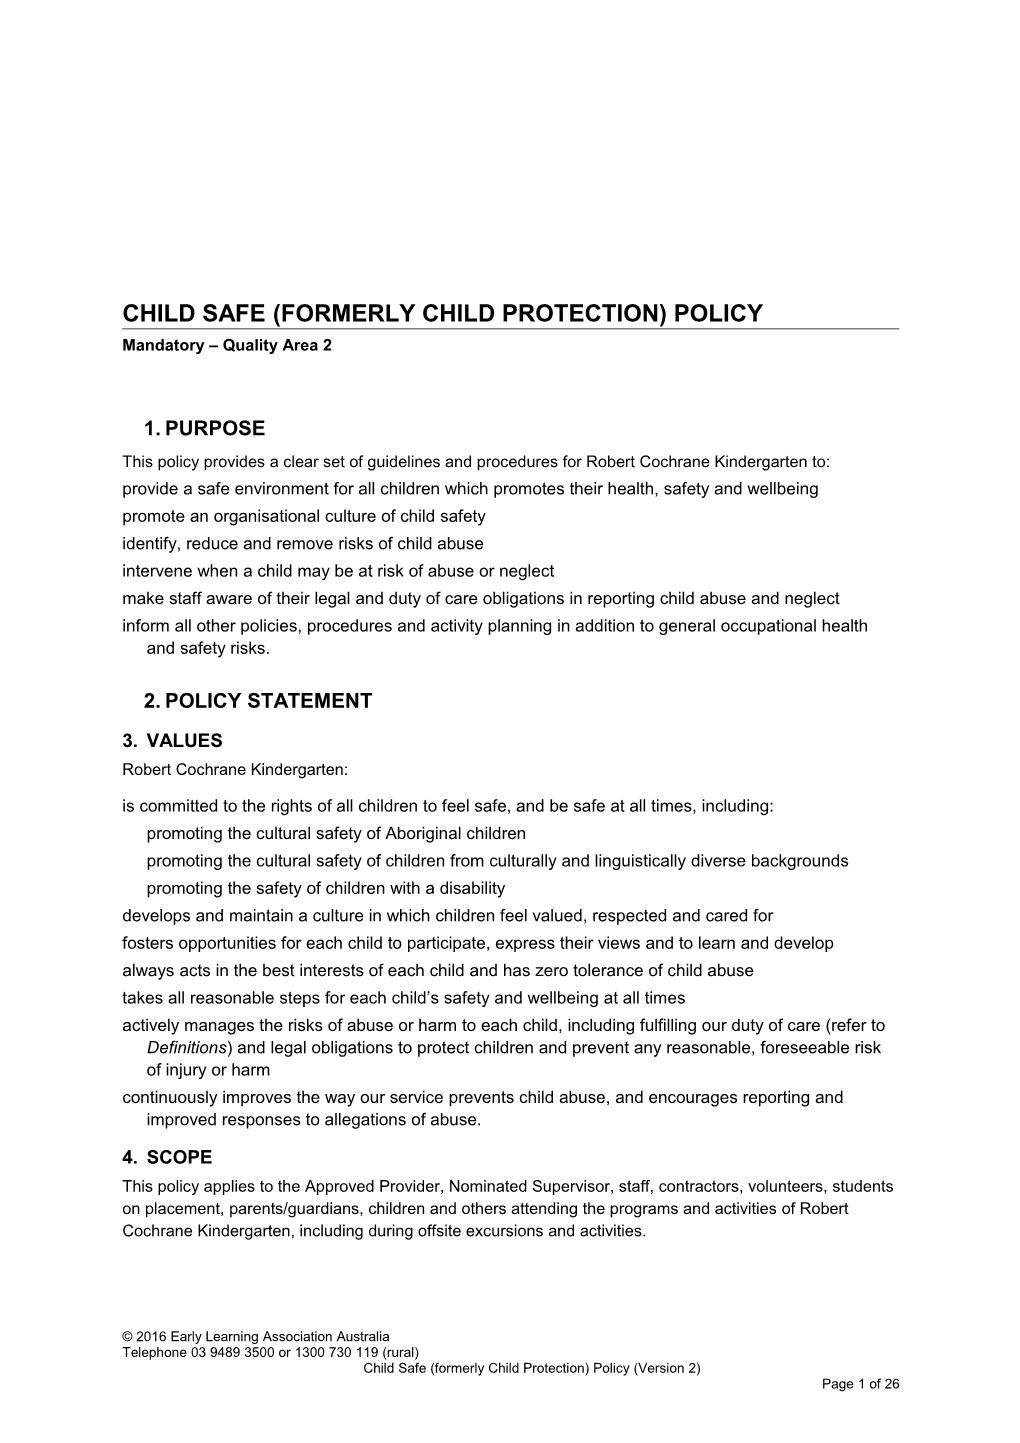 Child Safe(Formerly Child Protection) Policy